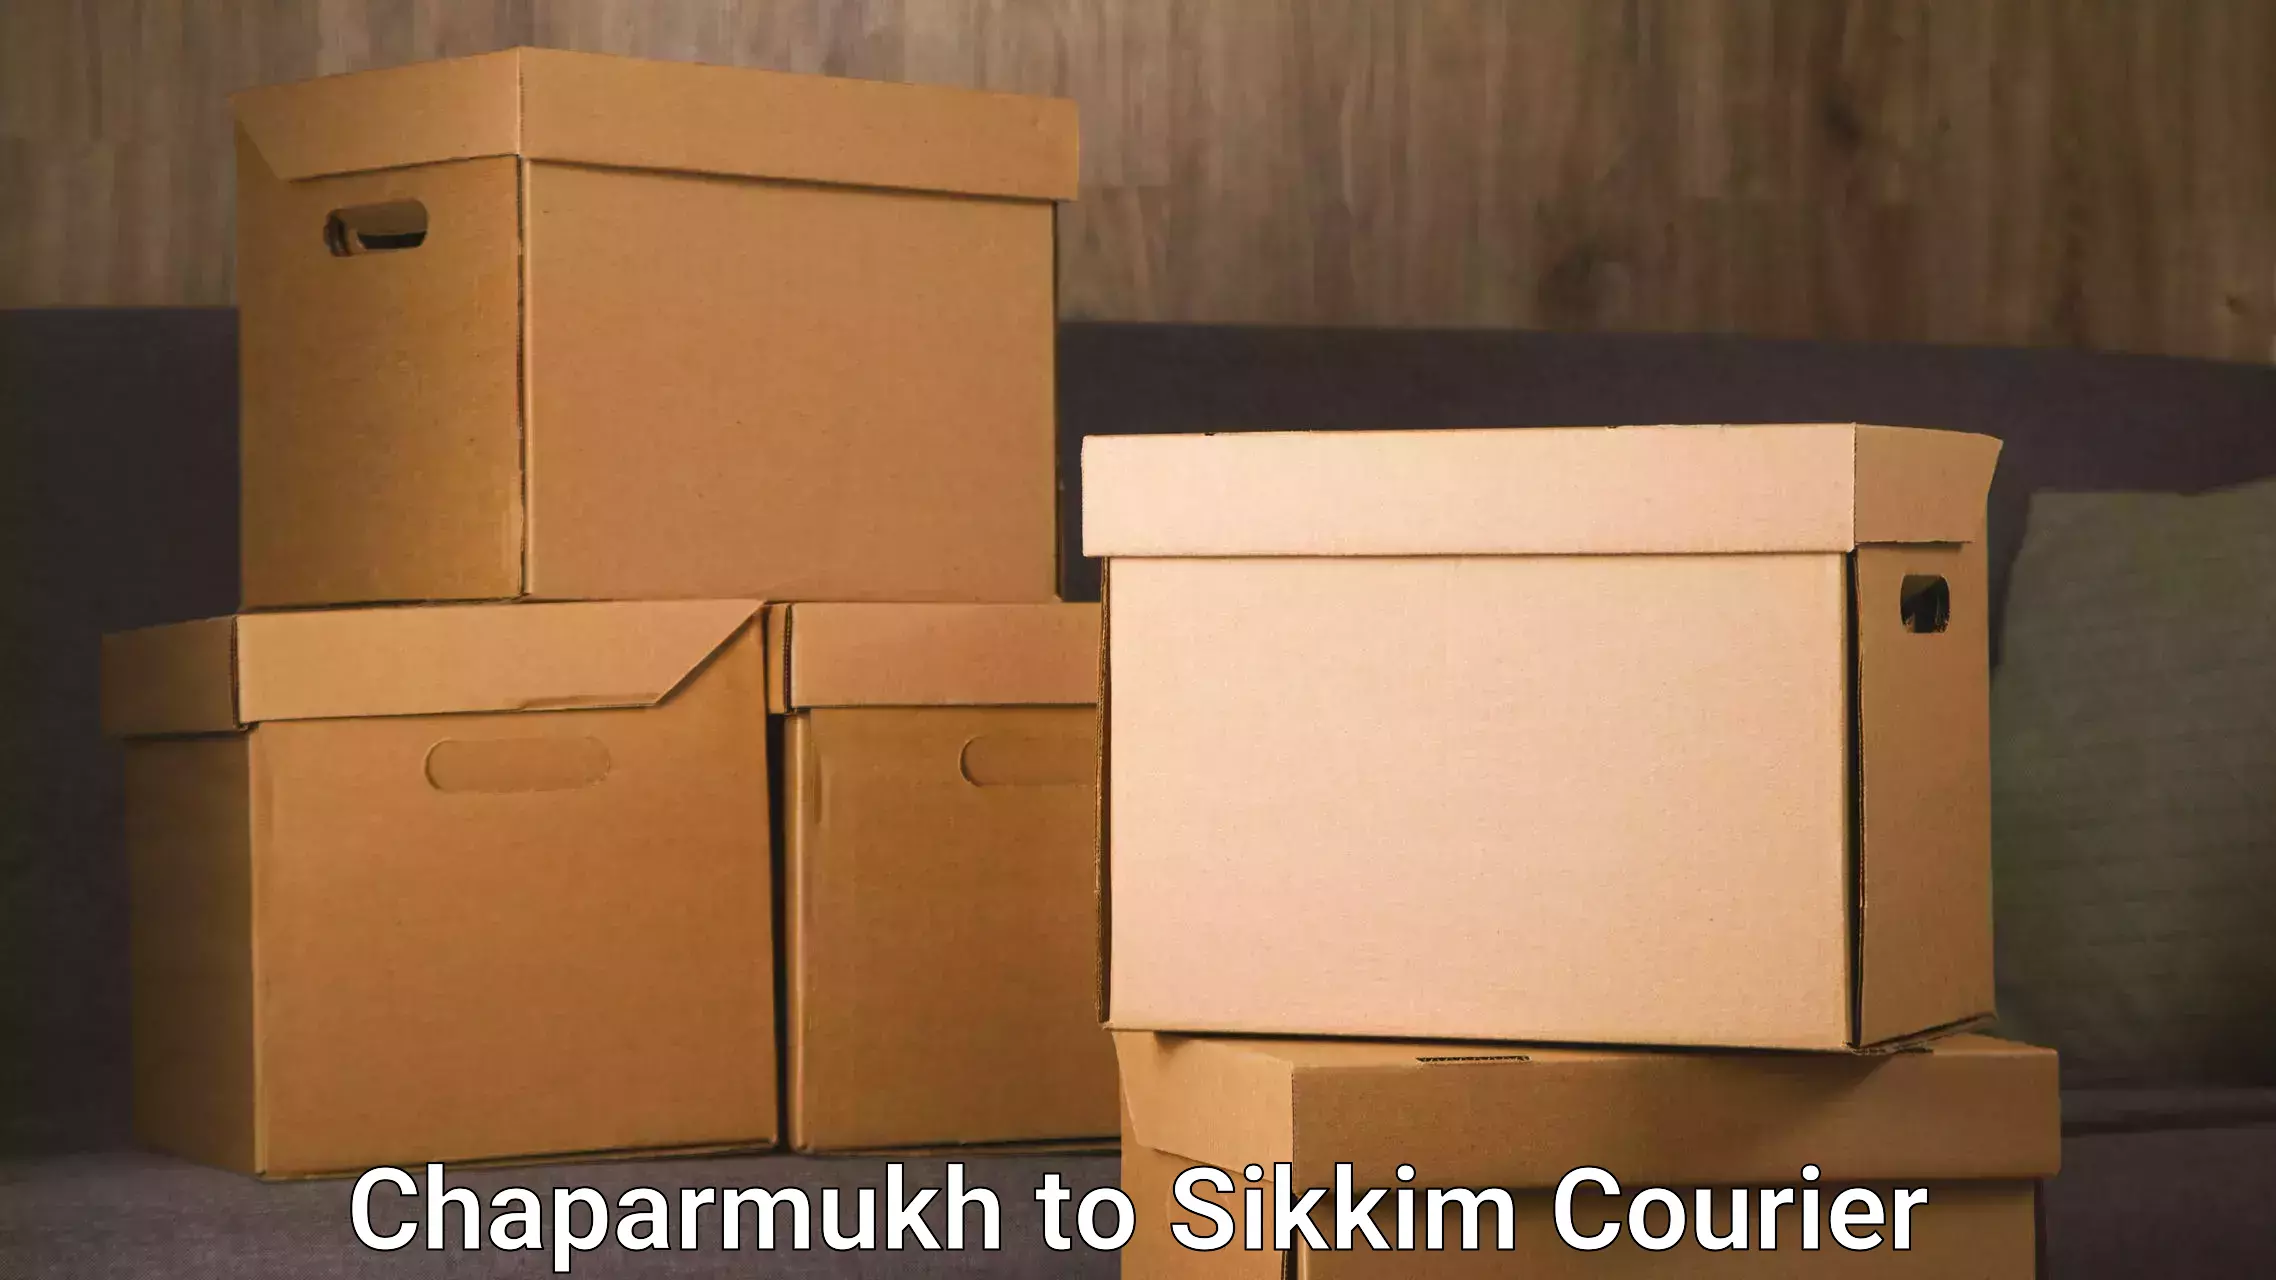 State-of-the-art courier technology Chaparmukh to East Sikkim